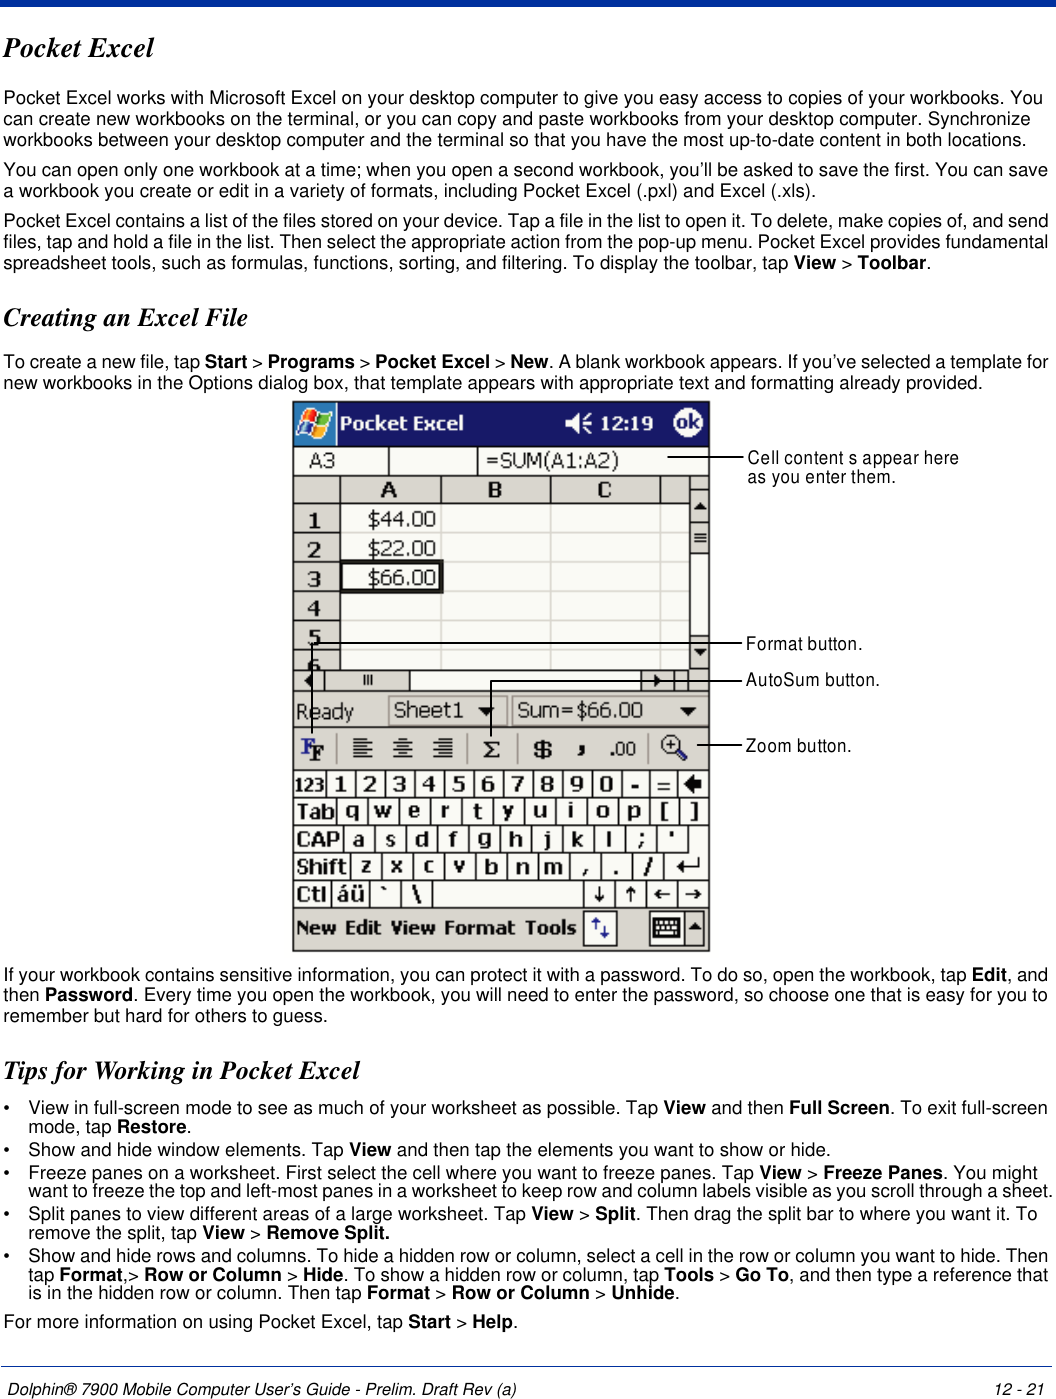 Dolphin® 7900 Mobile Computer User’s Guide - Prelim. Draft Rev (a) 12 - 21Pocket ExcelPocket Excel works with Microsoft Excel on your desktop computer to give you easy access to copies of your workbooks. You can create new workbooks on the terminal, or you can copy and paste workbooks from your desktop computer. Synchronize workbooks between your desktop computer and the terminal so that you have the most up-to-date content in both locations.You can open only one workbook at a time; when you open a second workbook, you’ll be asked to save the first. You can save a workbook you create or edit in a variety of formats, including Pocket Excel (.pxl) and Excel (.xls).Pocket Excel contains a list of the files stored on your device. Tap a file in the list to open it. To delete, make copies of, and send files, tap and hold a file in the list. Then select the appropriate action from the pop-up menu. Pocket Excel provides fundamental spreadsheet tools, such as formulas, functions, sorting, and filtering. To display the toolbar, tap View &gt; Toolbar.Creating an Excel FileTo create a new file, tap Start &gt; Programs &gt; Pocket Excel &gt; New. A blank workbook appears. If you’ve selected a template for new workbooks in the Options dialog box, that template appears with appropriate text and formatting already provided. If your workbook contains sensitive information, you can protect it with a password. To do so, open the workbook, tap Edit, and then Password. Every time you open the workbook, you will need to enter the password, so choose one that is easy for you to remember but hard for others to guess.Tips for Working in Pocket Excel•           View in full-screen mode to see as much of your worksheet as possible. Tap View and then Full Screen. To exit full-screen mode, tap Restore.•           Show and hide window elements. Tap View and then tap the elements you want to show or hide.•           Freeze panes on a worksheet. First select the cell where you want to freeze panes. Tap View &gt; Freeze Panes. You might want to freeze the top and left-most panes in a worksheet to keep row and column labels visible as you scroll through a sheet.•           Split panes to view different areas of a large worksheet. Tap View &gt; Split. Then drag the split bar to where you want it. To remove the split, tap View &gt; Remove Split.•           Show and hide rows and columns. To hide a hidden row or column, select a cell in the row or column you want to hide. Then tap Format,&gt; Row or Column &gt; Hide. To show a hidden row or column, tap Tools &gt; Go To, and then type a reference that is in the hidden row or column. Then tap Format &gt; Row or Column &gt; Unhide.For more information on using Pocket Excel, tap Start &gt; Help.Cell content s appear hereas you enter them.AutoSum button.Format button.Zoom button.